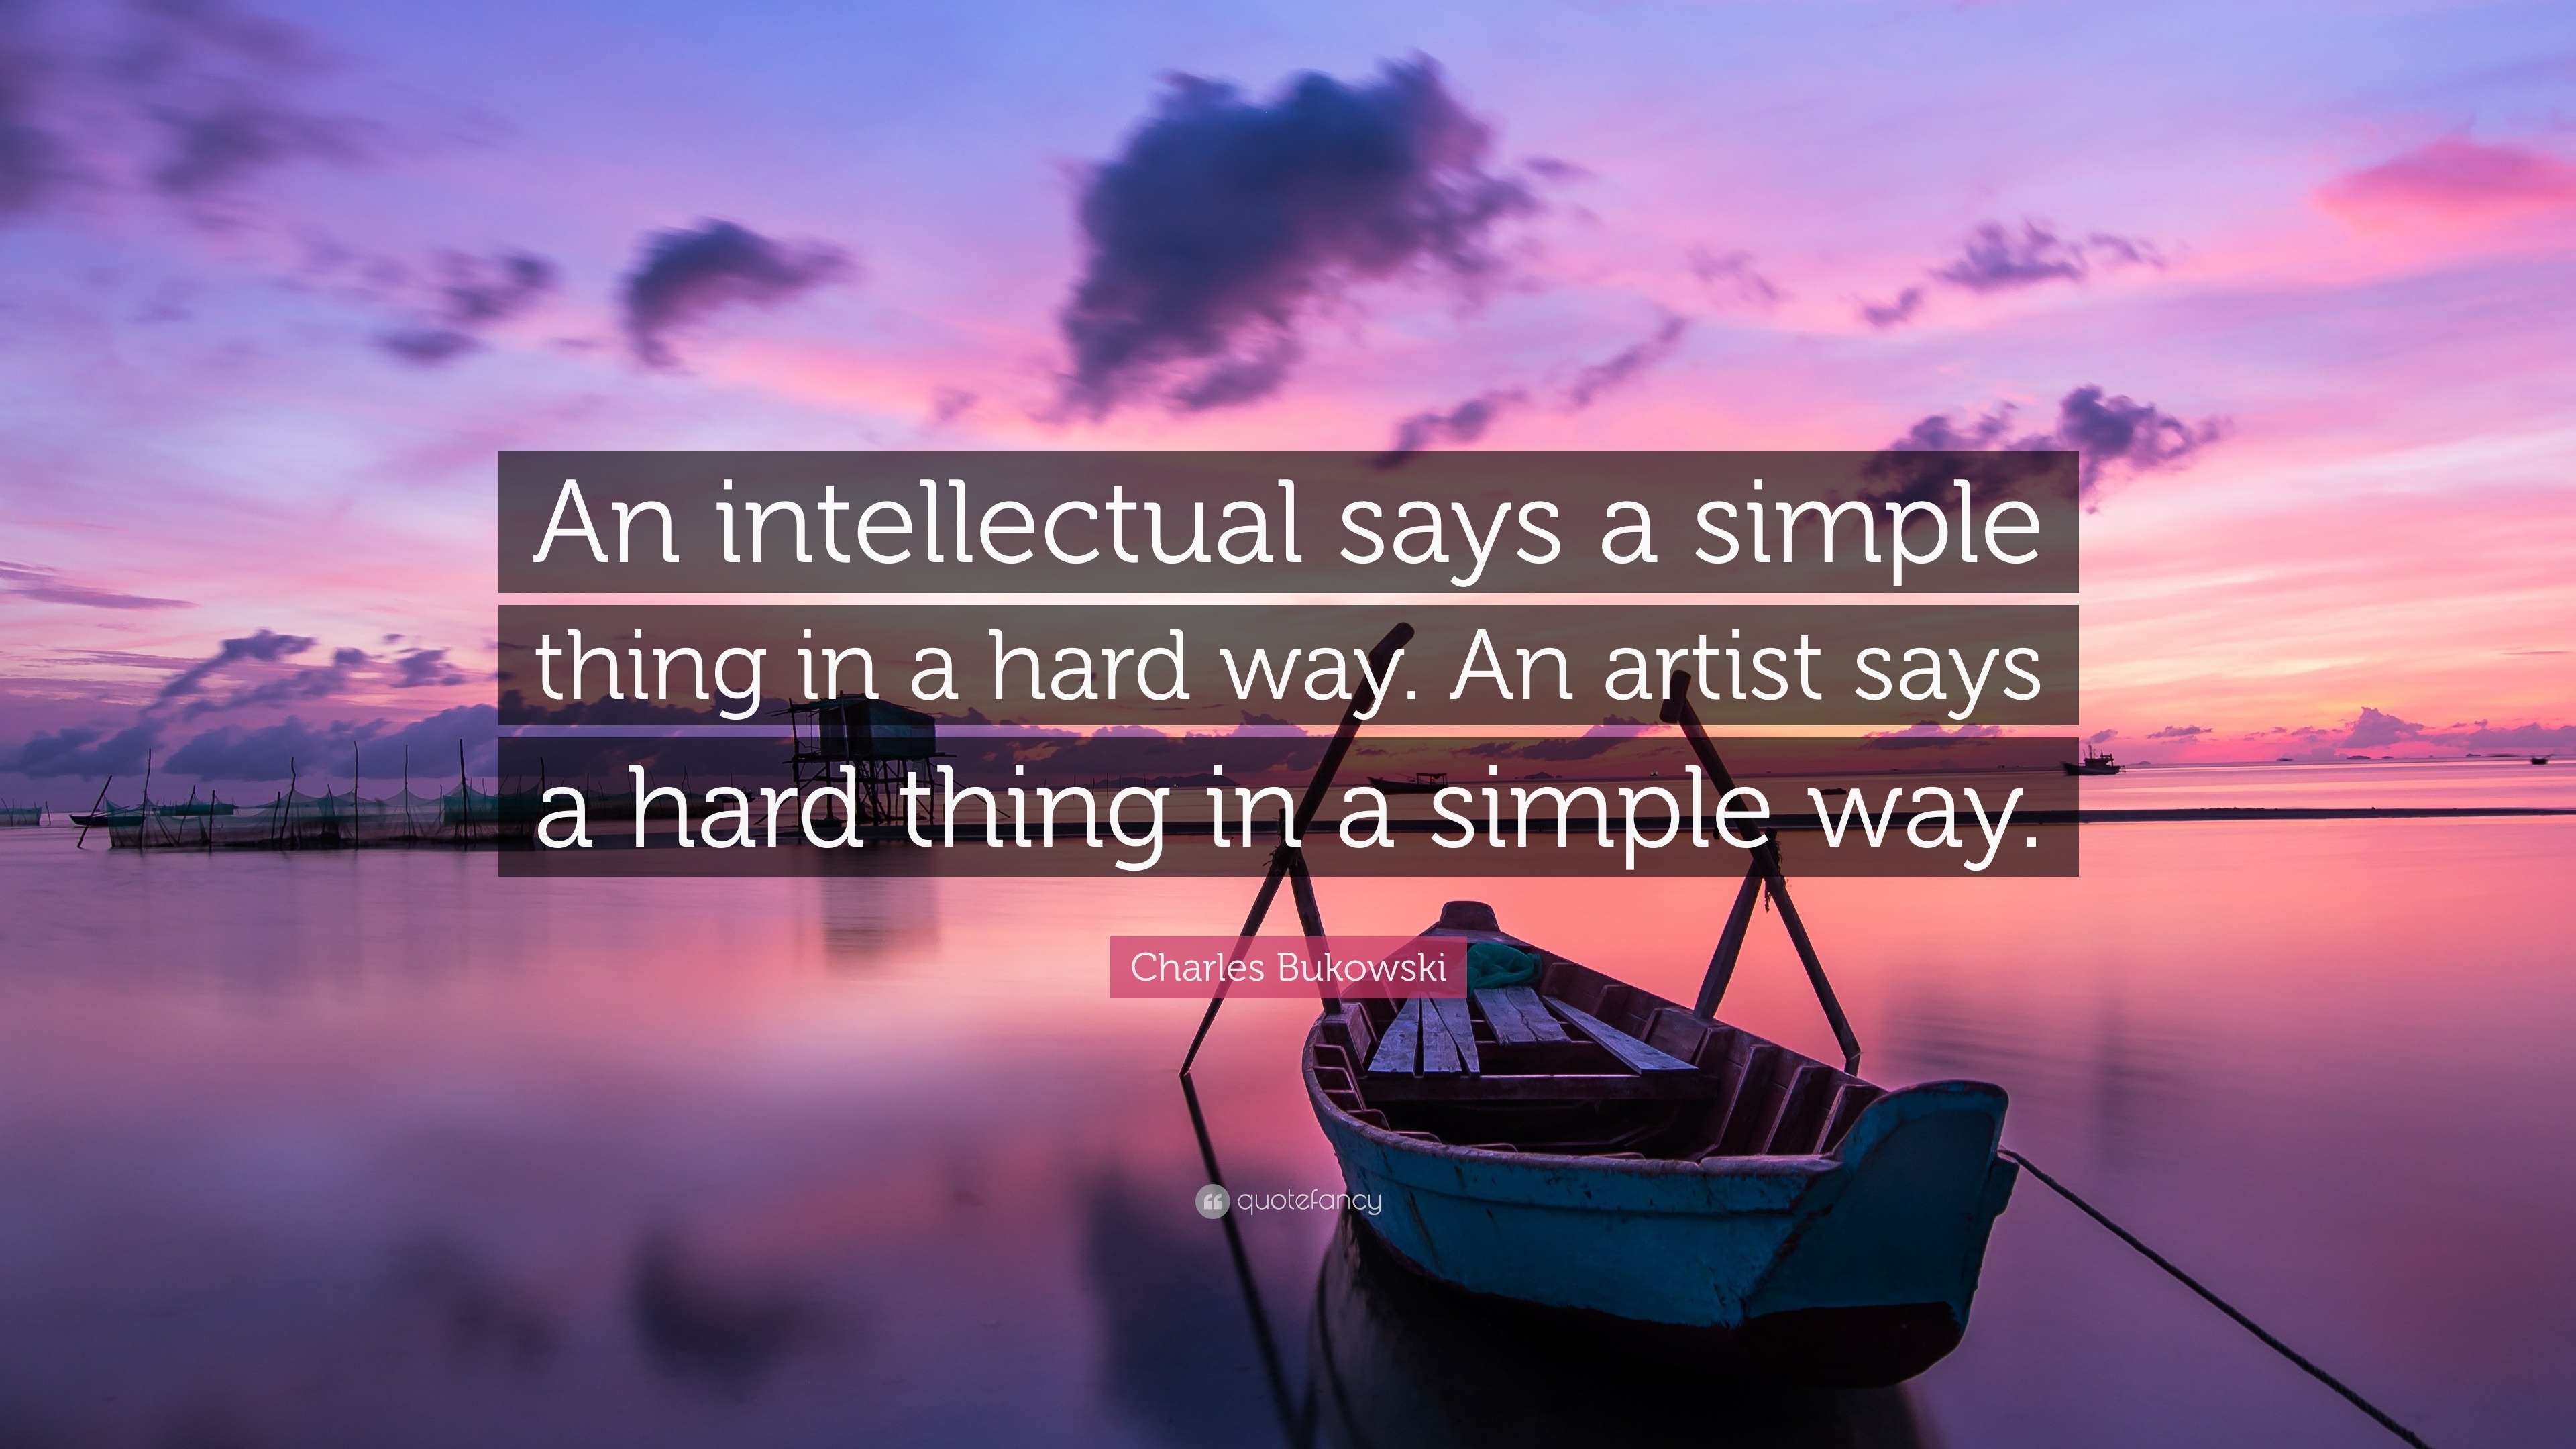 Charles Bukowski Quote “An intellectual says a simple thing in a hard way